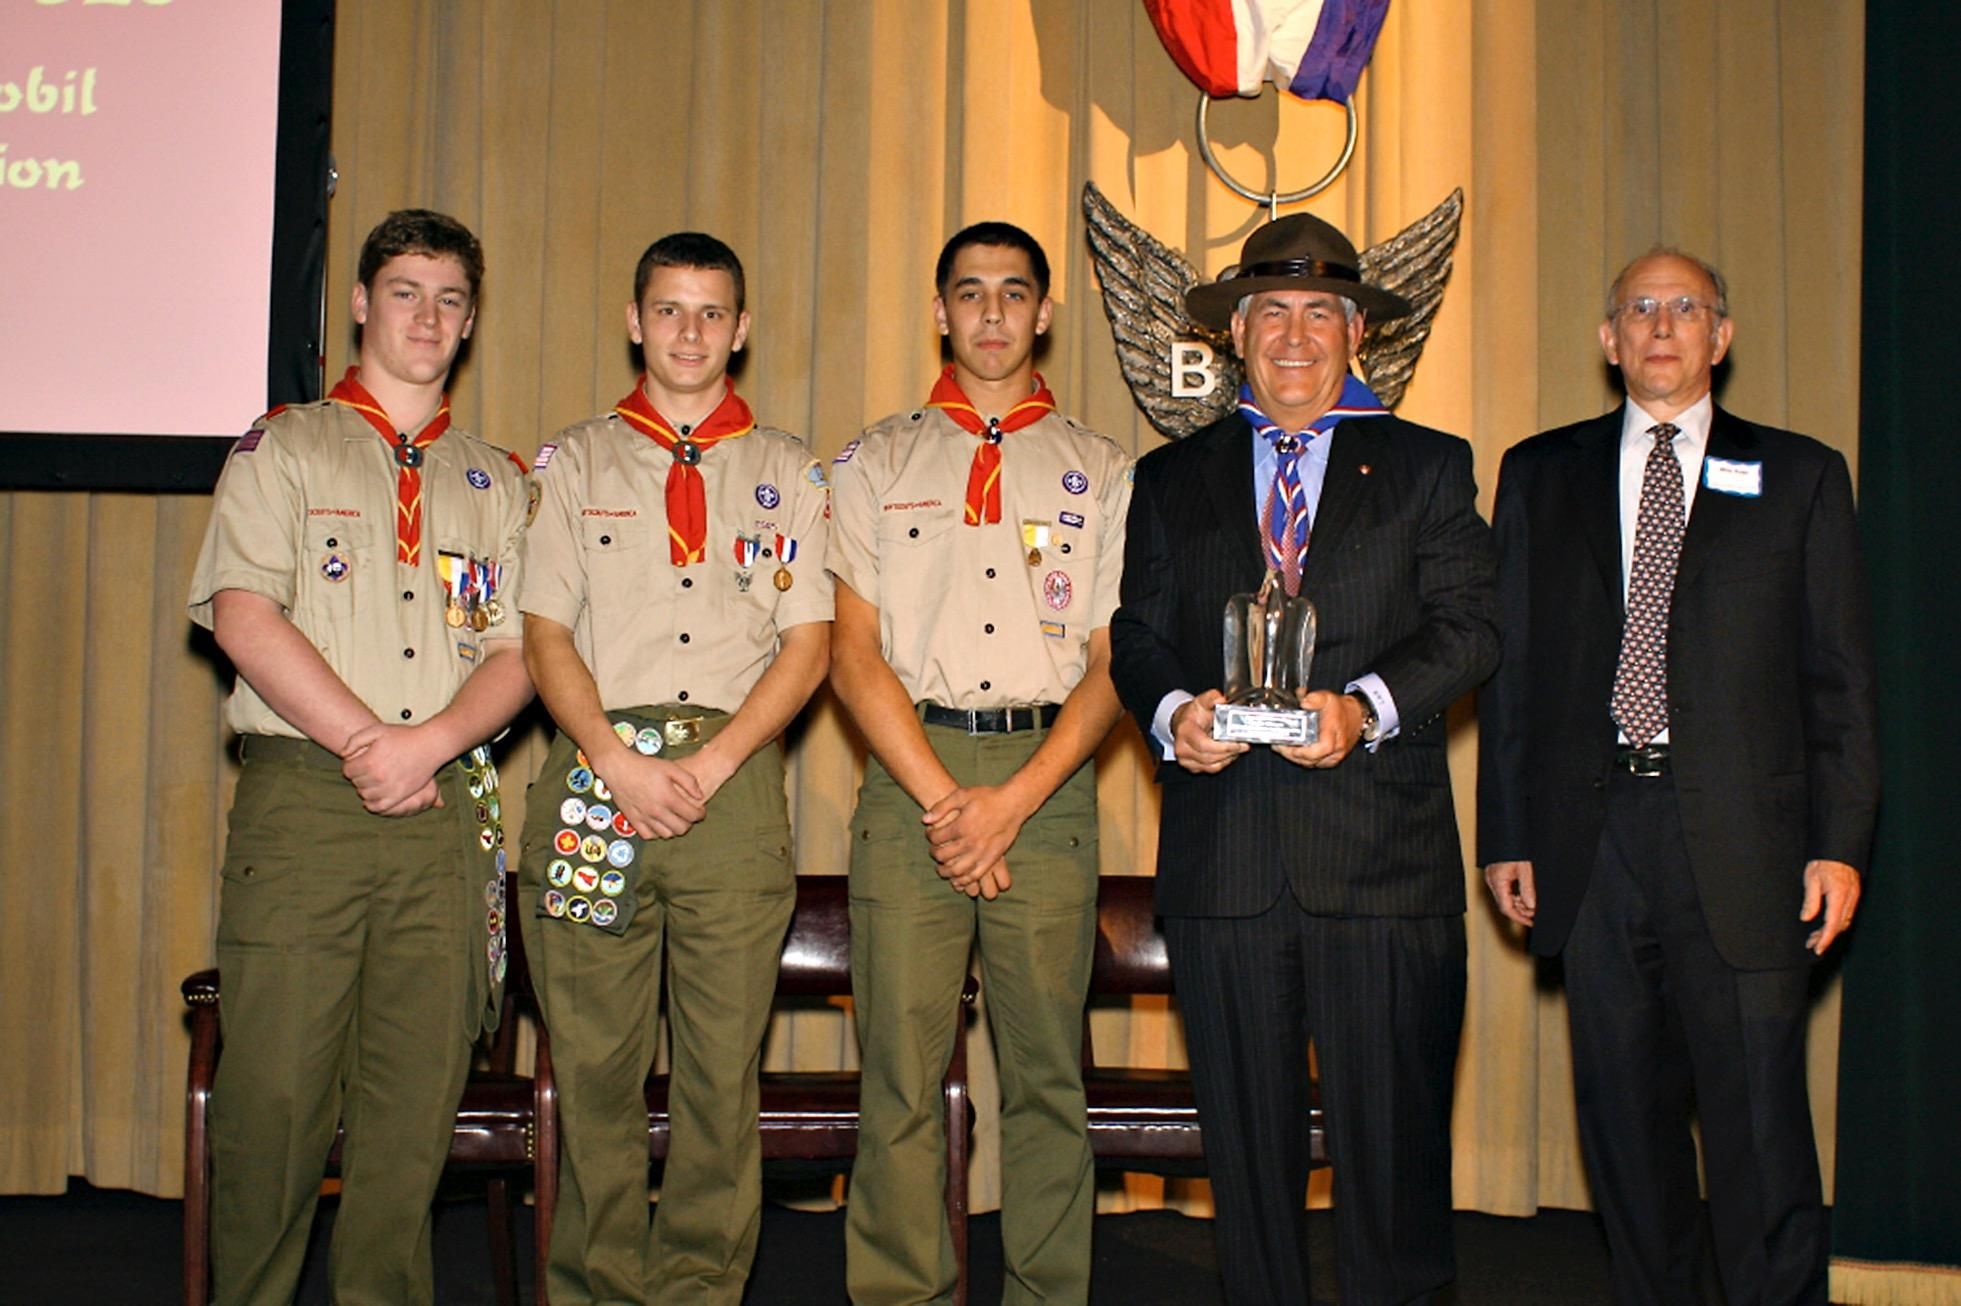 Former ExxonMobil Chairman and CEO RexTillerson being inducted into the BSA Eagle Scout Hall of Fame in 2009